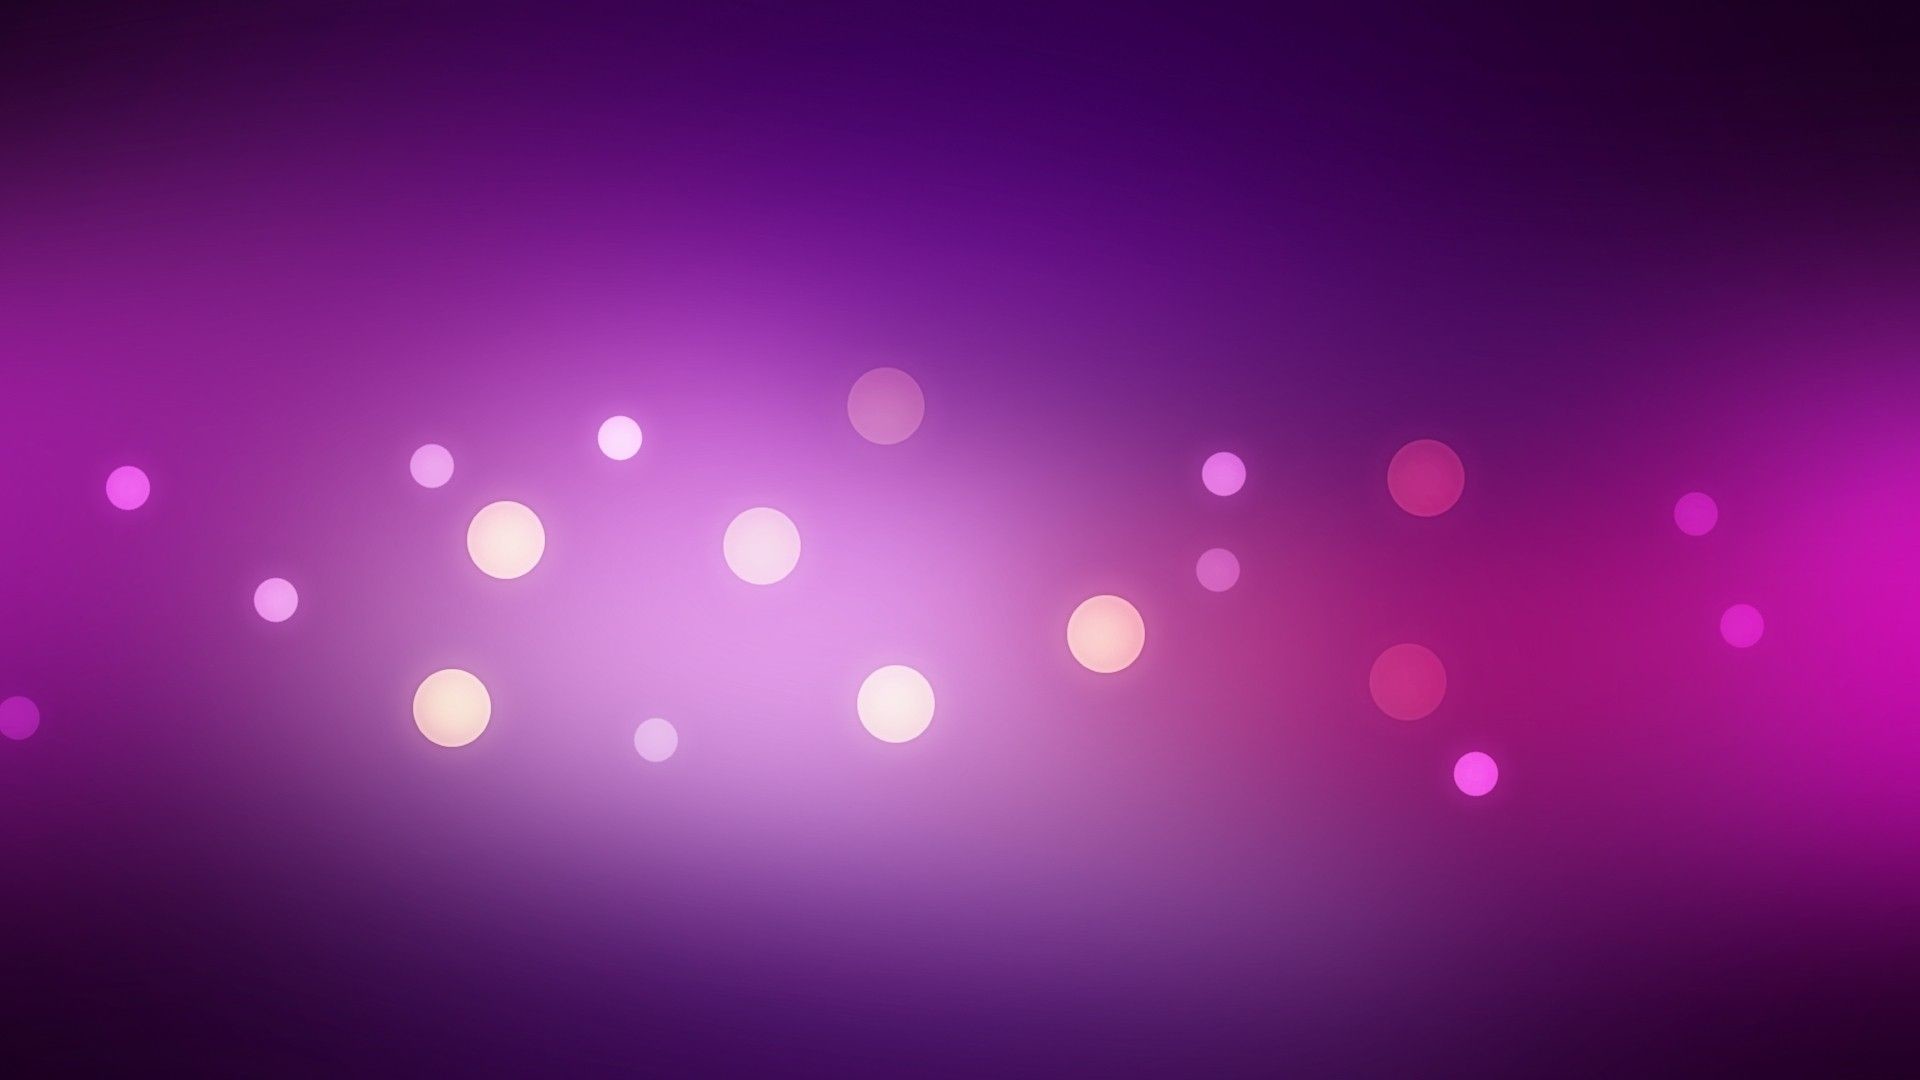 1920x1080 ... Colorful abstract lights background | PSDGraphics Abstract Purple ...